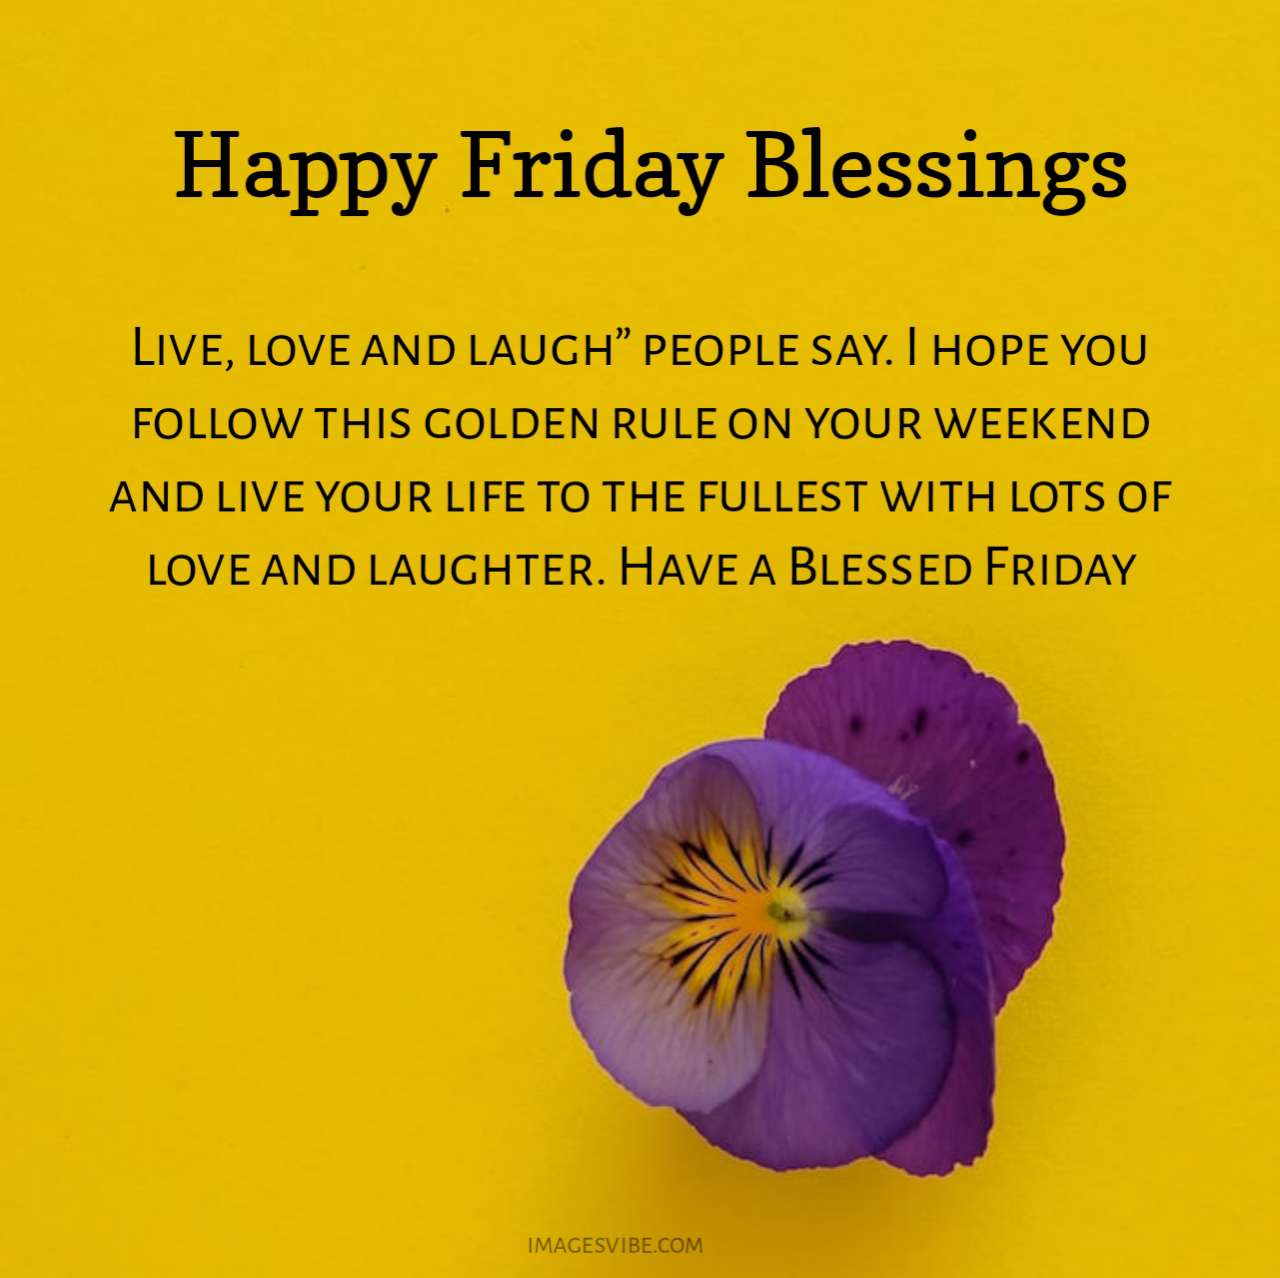 Best 30+ Friday Blessings Images & Quotes in 2023 - Images Vibe